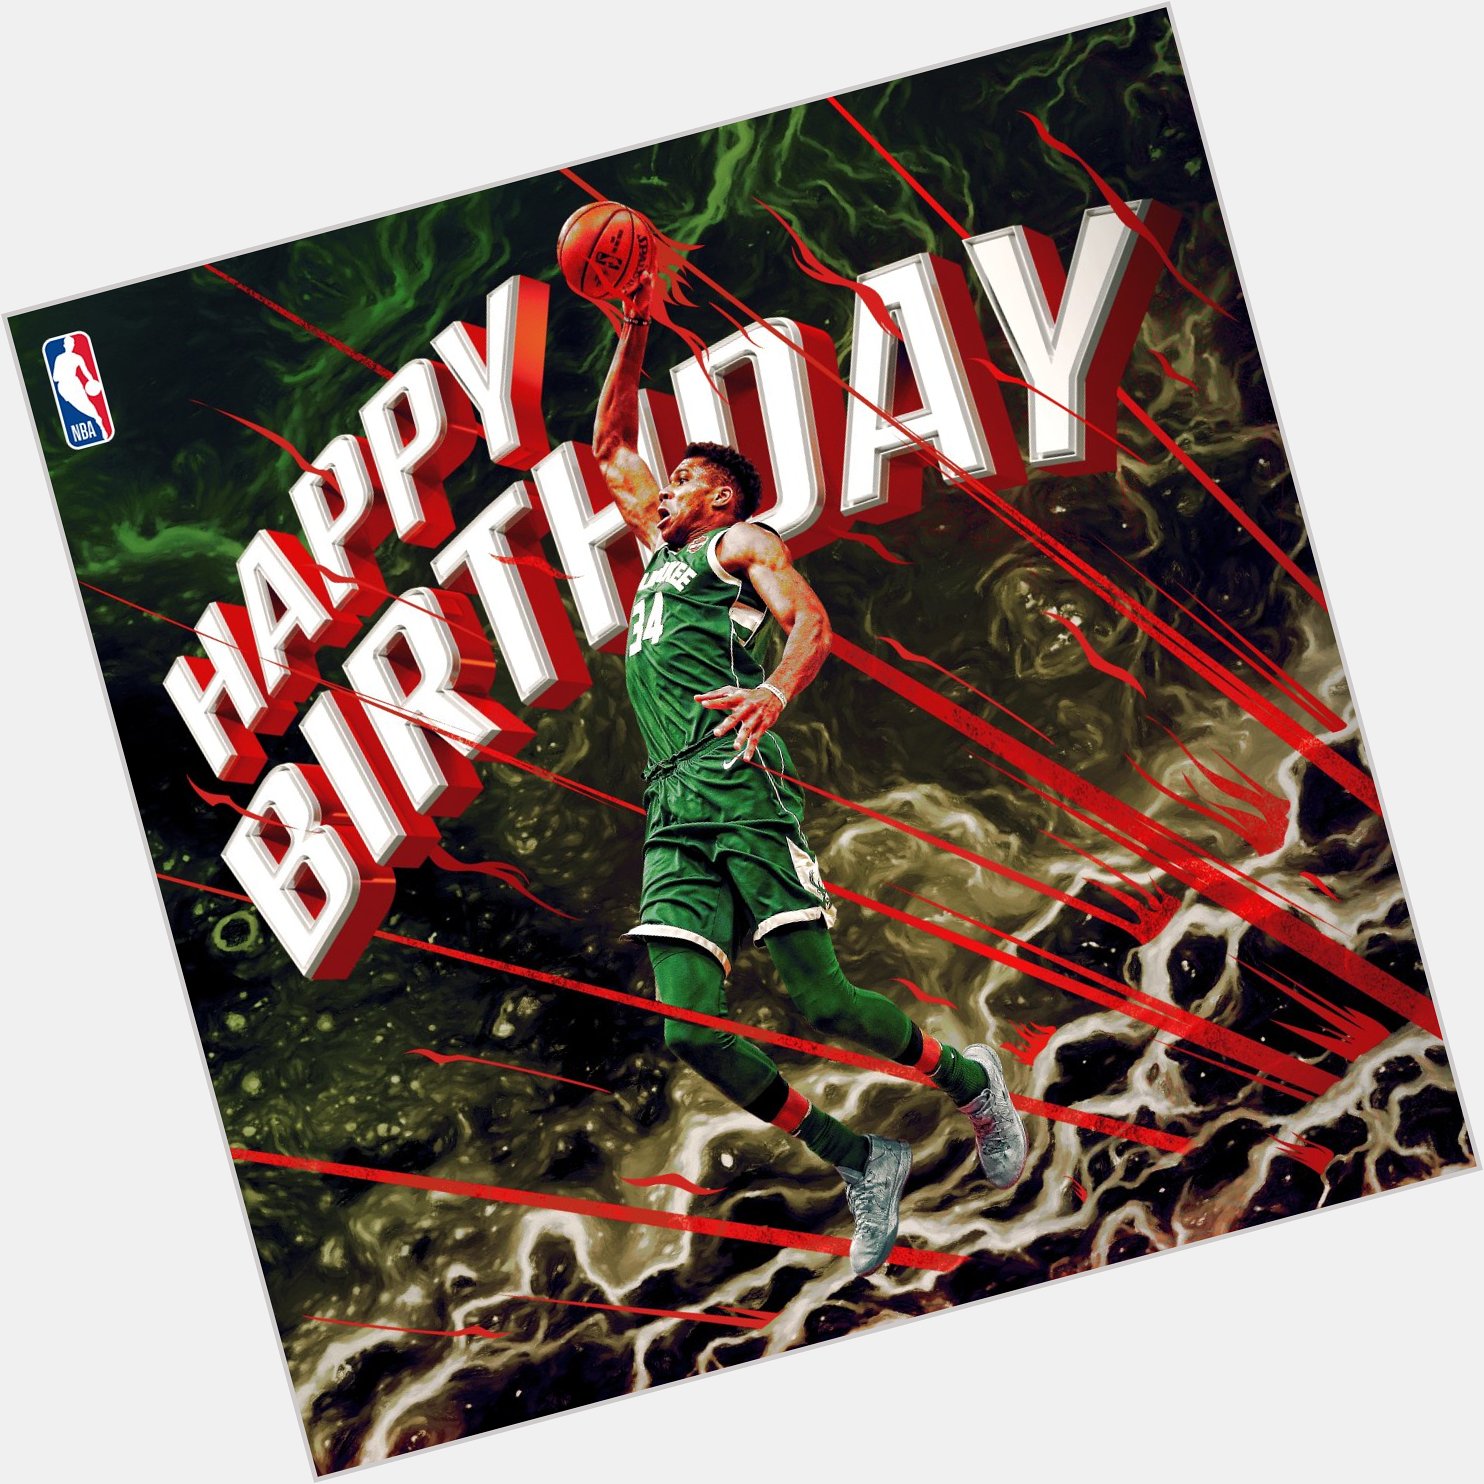 Join us in wishing Giannis Antetokounmpo a Happy 23rd Birthday! 